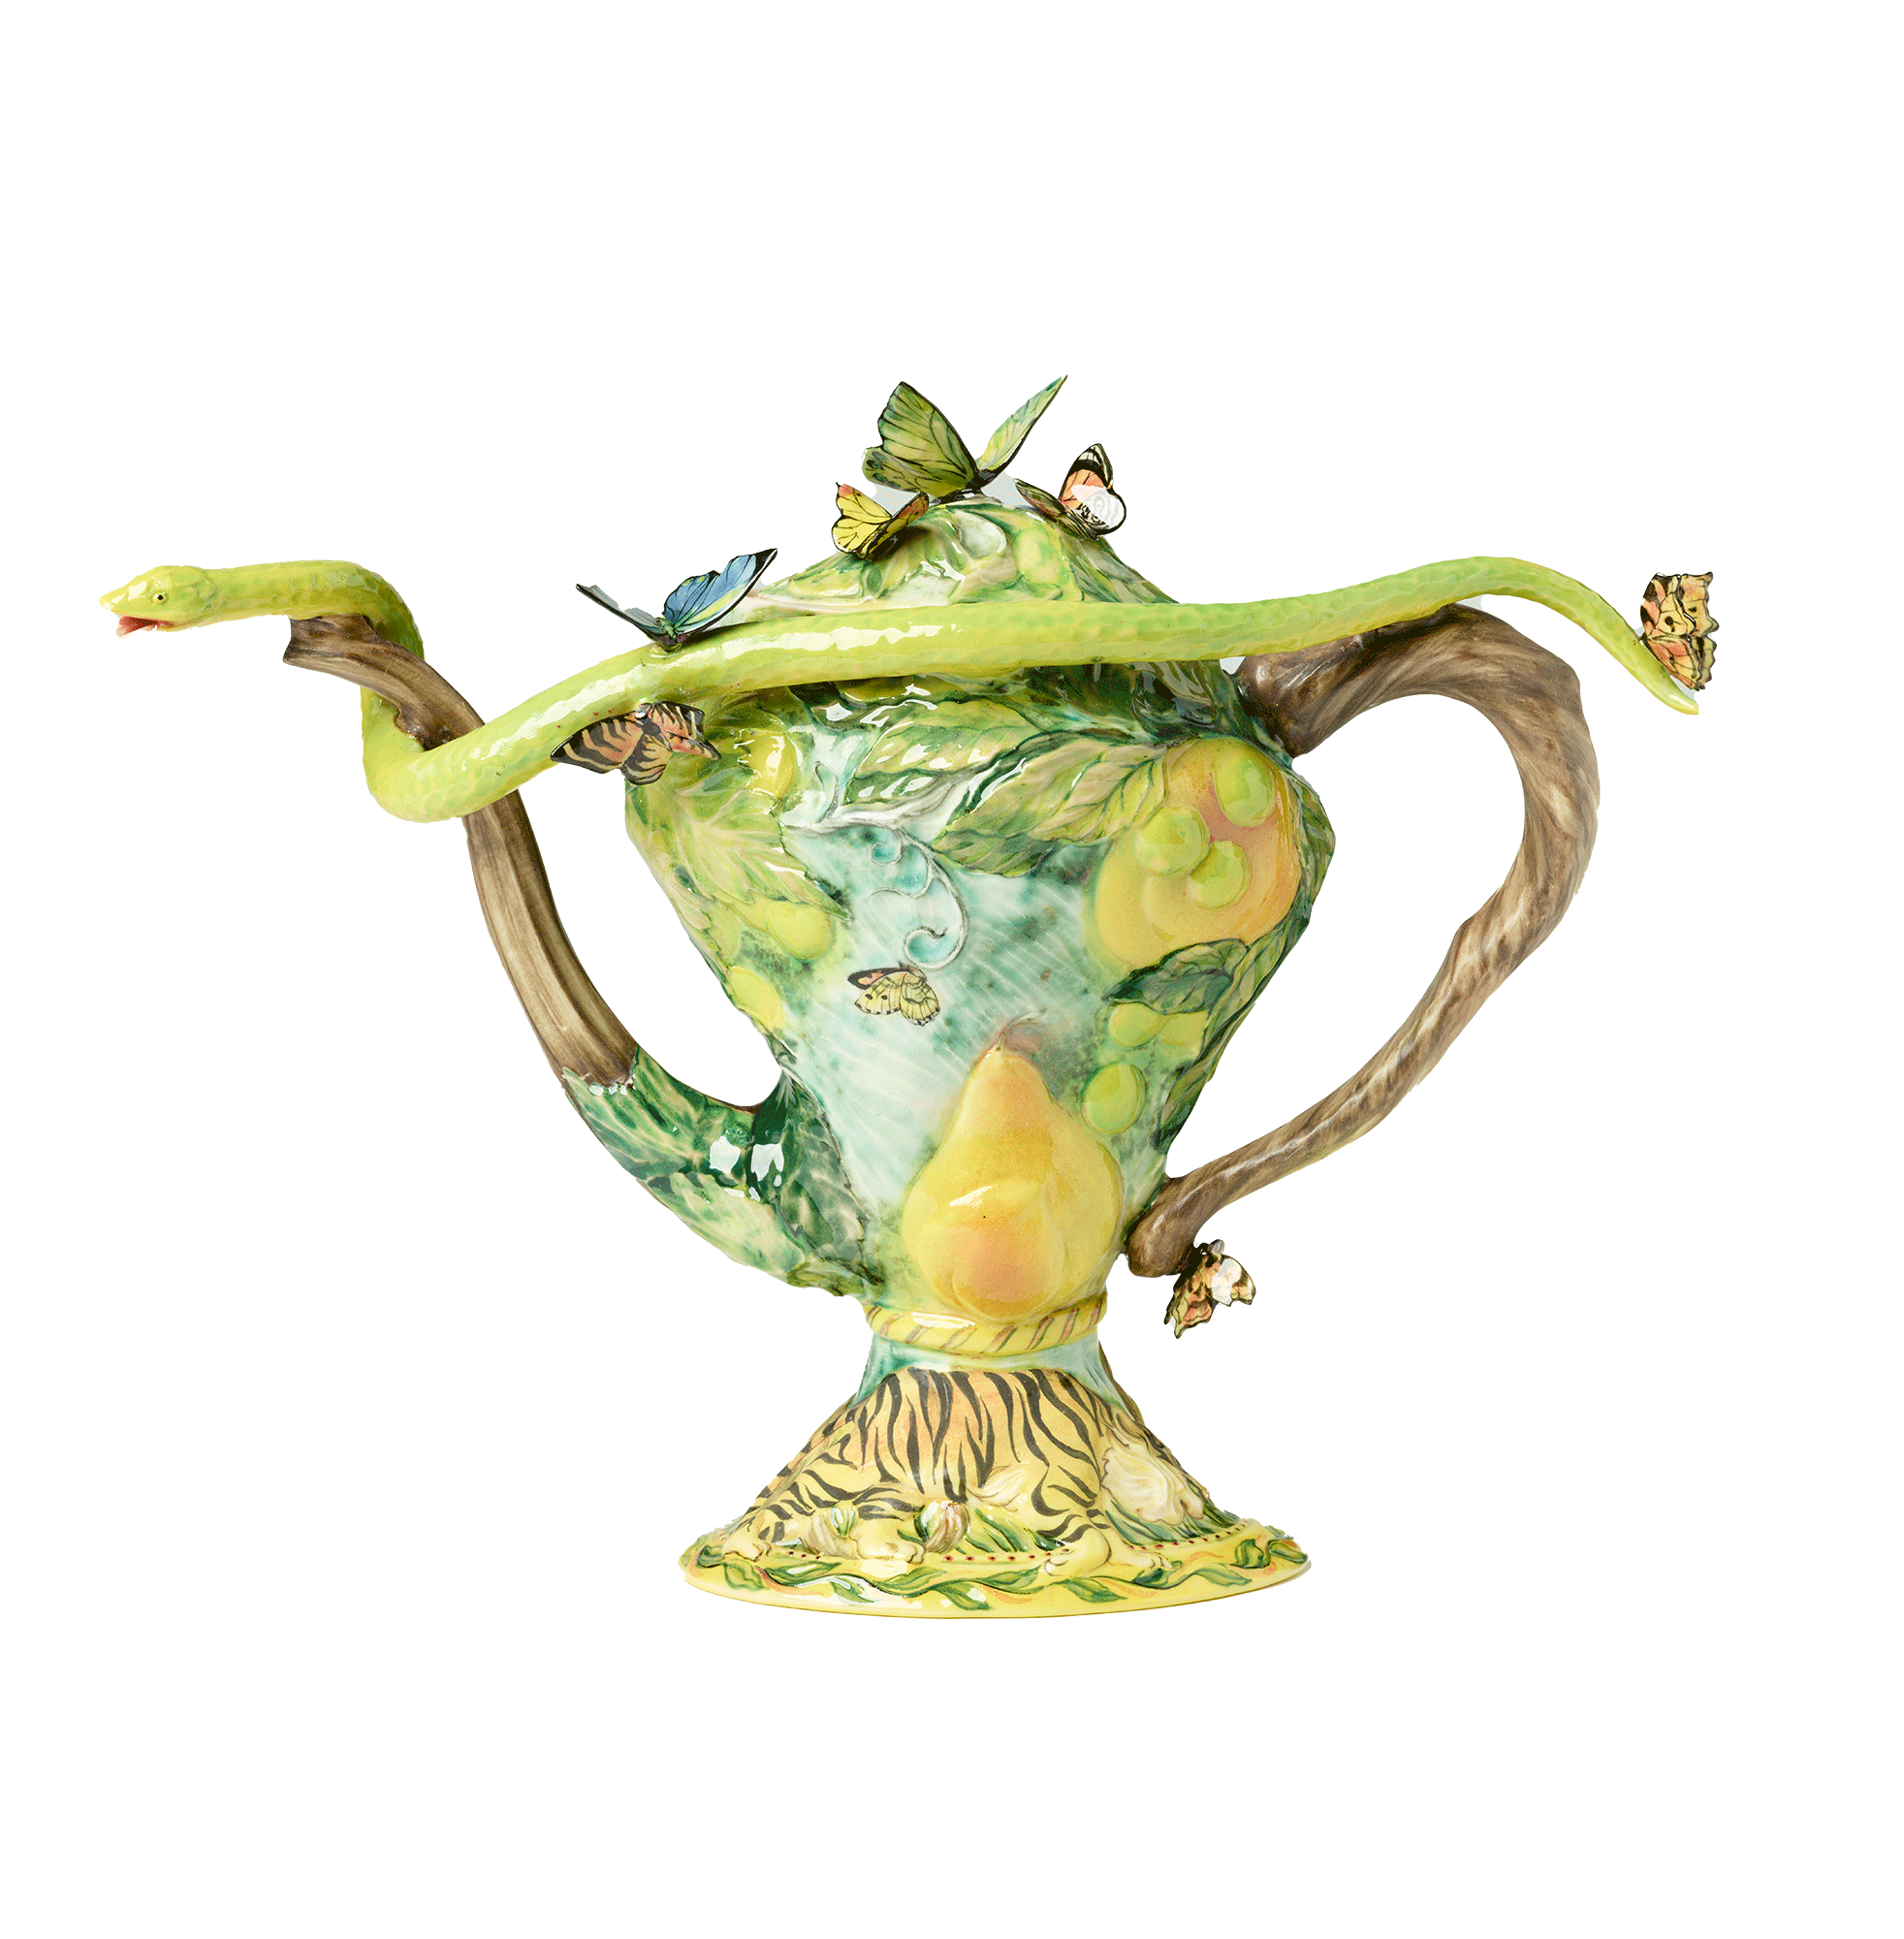 /Teapot%20with%20leaves%2C%20pears%2C%20and%20butterflies%20on%20body.%20Tiger%20on%20the%20base.%203-dimensional%20butterflies%20on%20top%20of%20teapot%20and%20handle.%20Green%203-dimensional%20snake%20stretches%20from%20spout%20to%20handle.